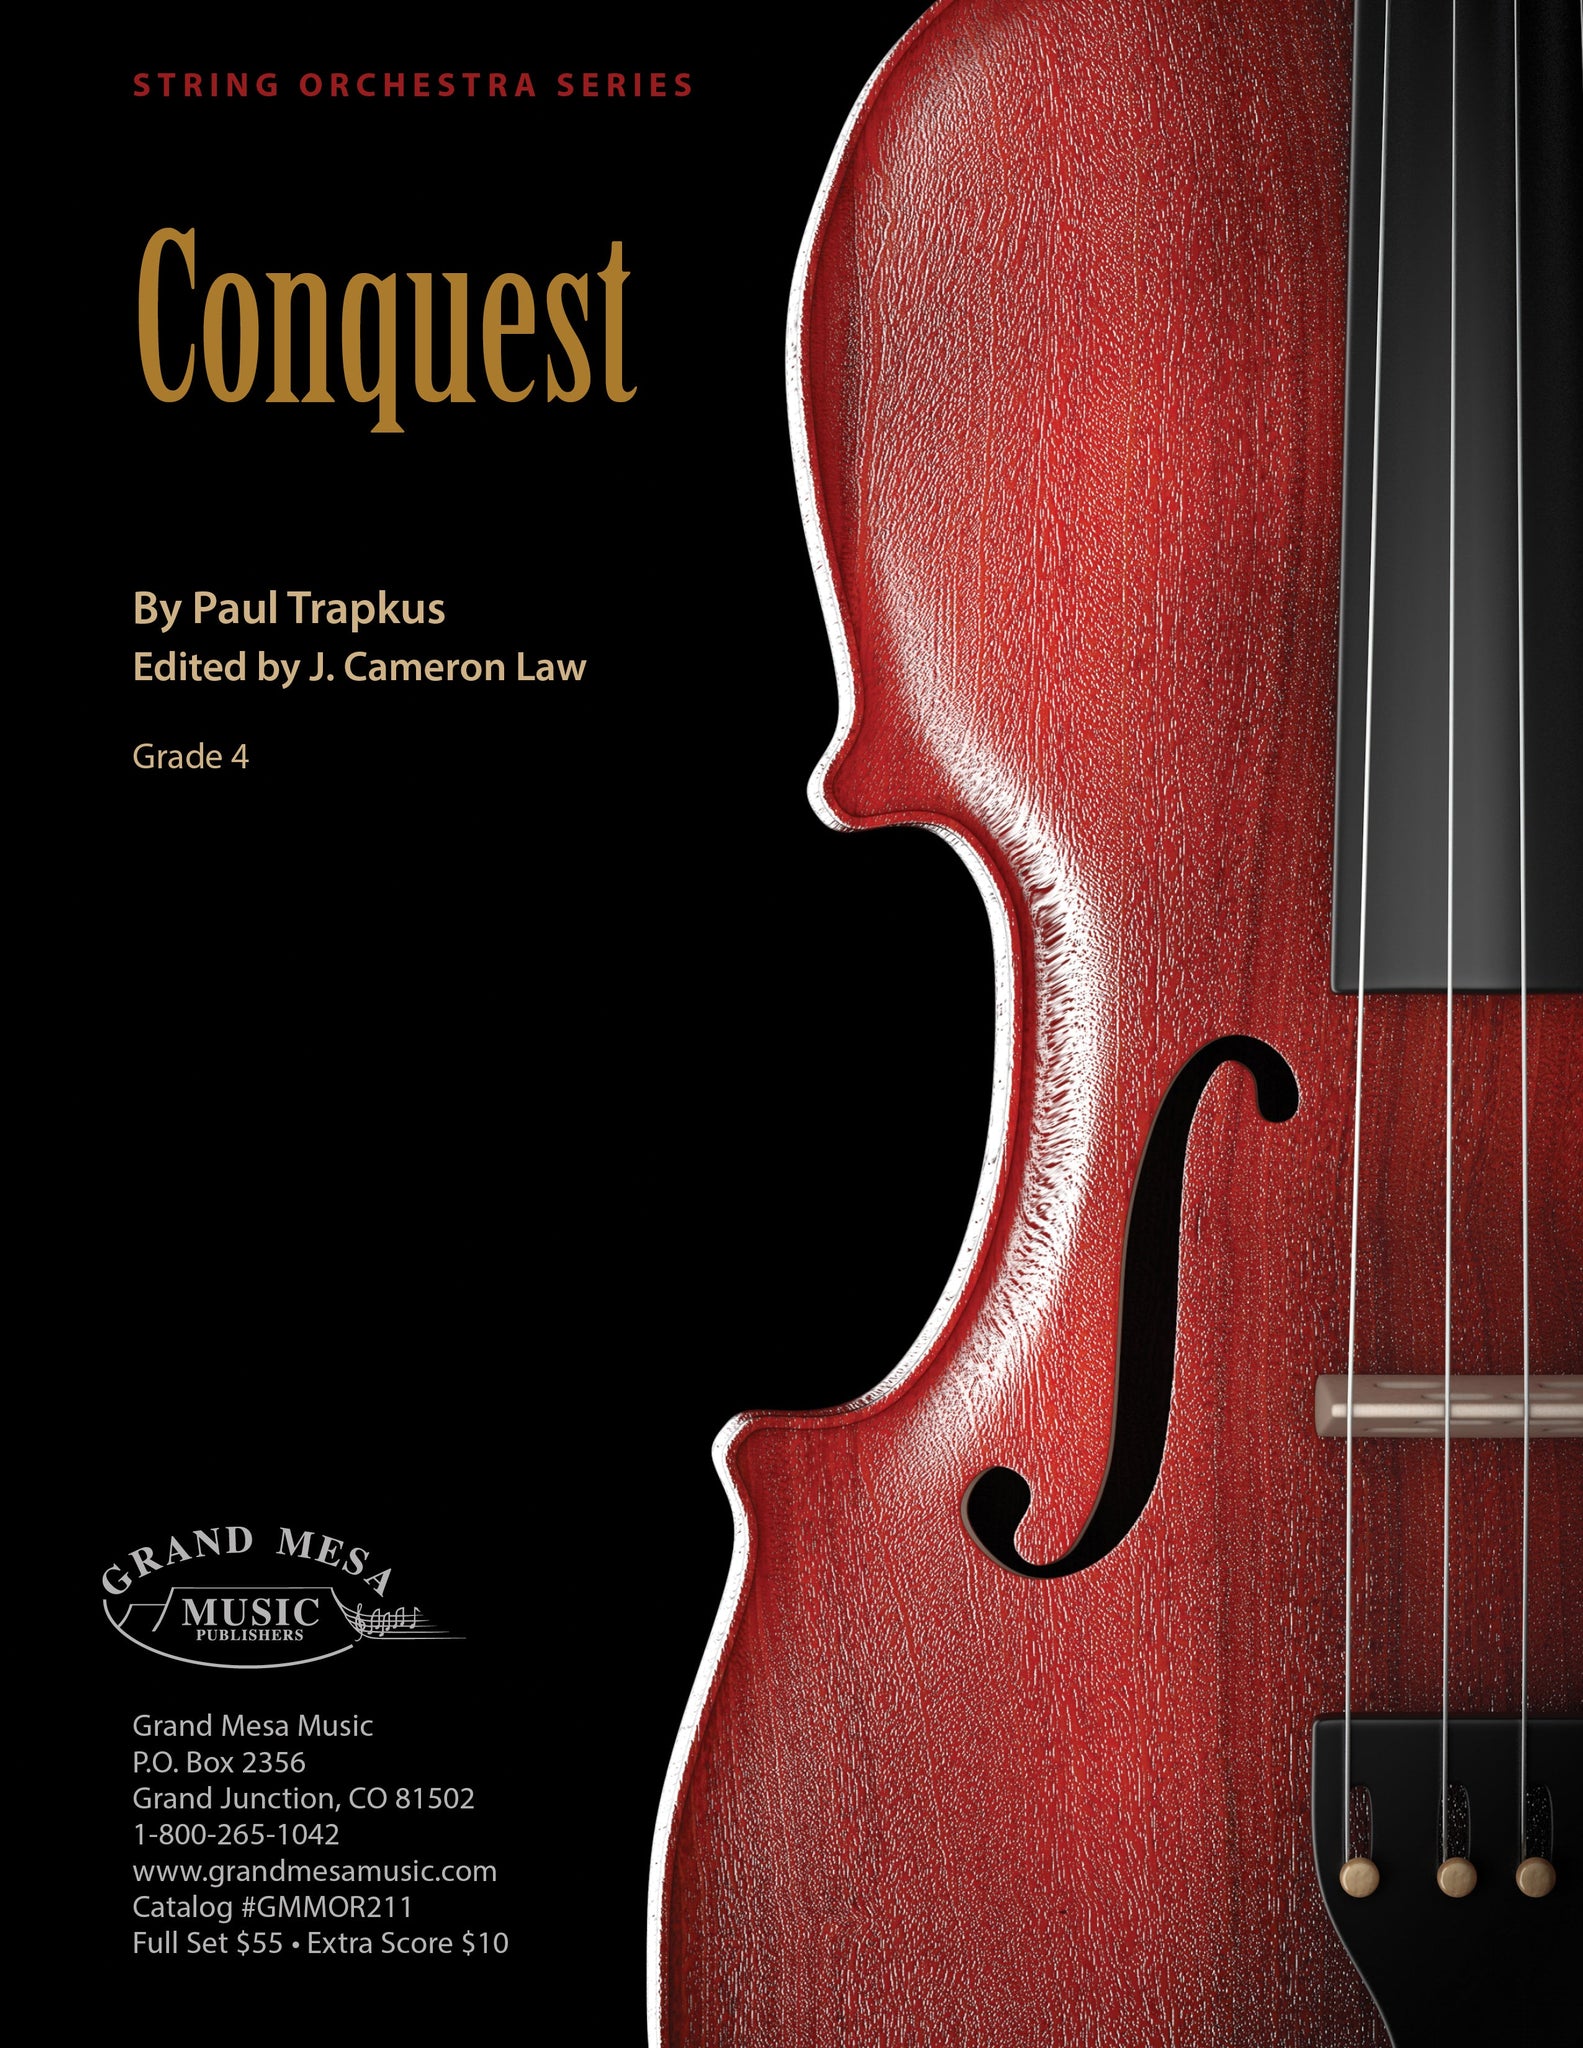 Strings sheet music cover of Conquest, composed by Paul Trapkus.